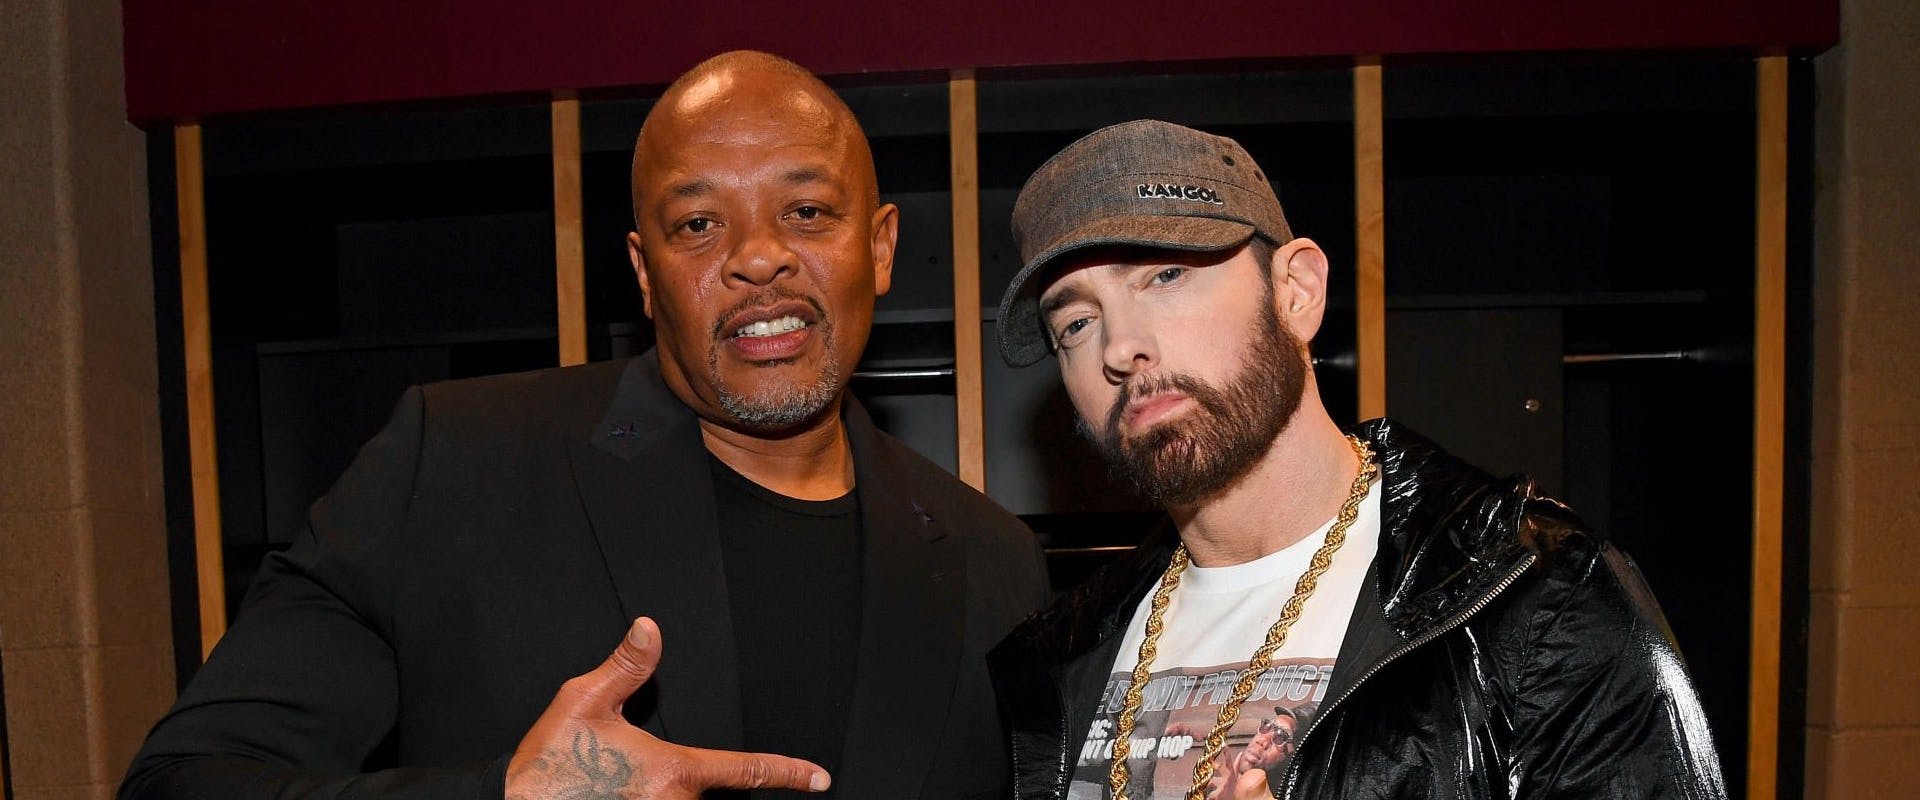 Dr. Dre and Eminem pose backstage during the 36th Annual Rock & Roll Hall Of Fame Induction Ceremony at Rocket Mortgage Fieldhouse on October 30, 2021 in Cleveland, Ohio. 